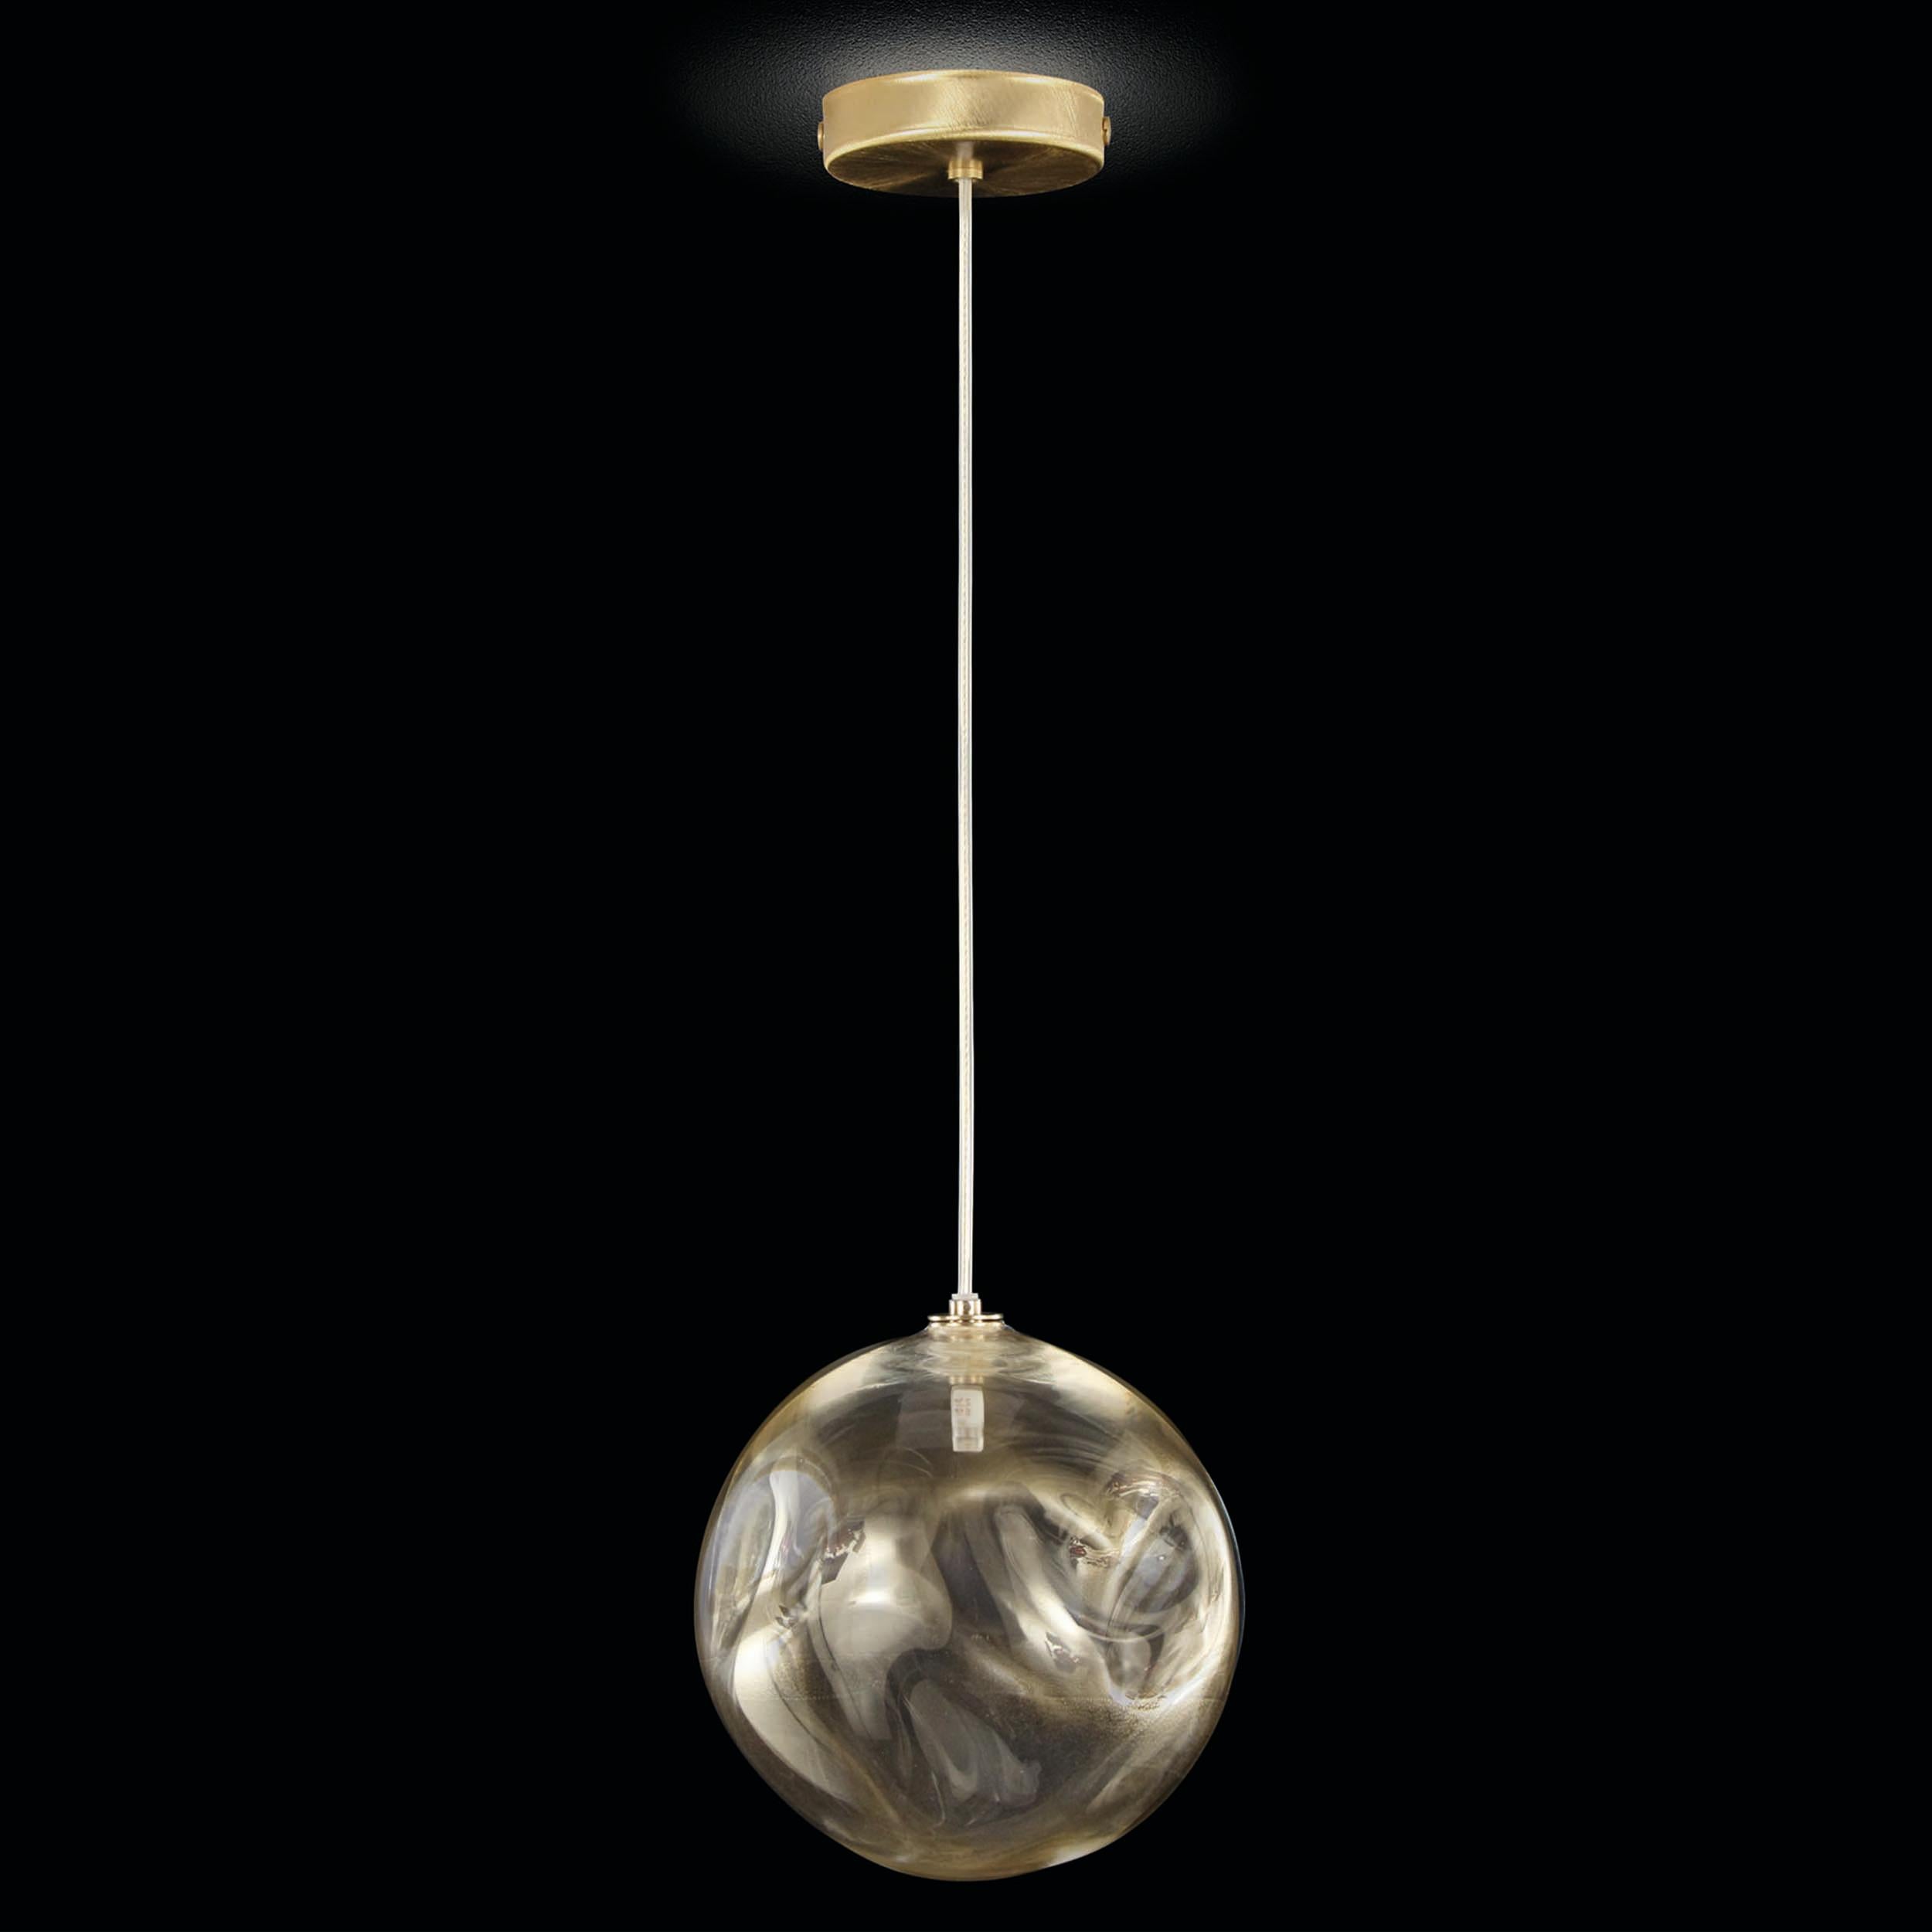 Artistic suspension lamp, glass sphere in gold Murano glass.
Elegant and unmistakable, suggestive and poetical, soft and delicate are some of the adjectives that can be used to describe the blown glass ball chandelier Desafinado, our ceiling light